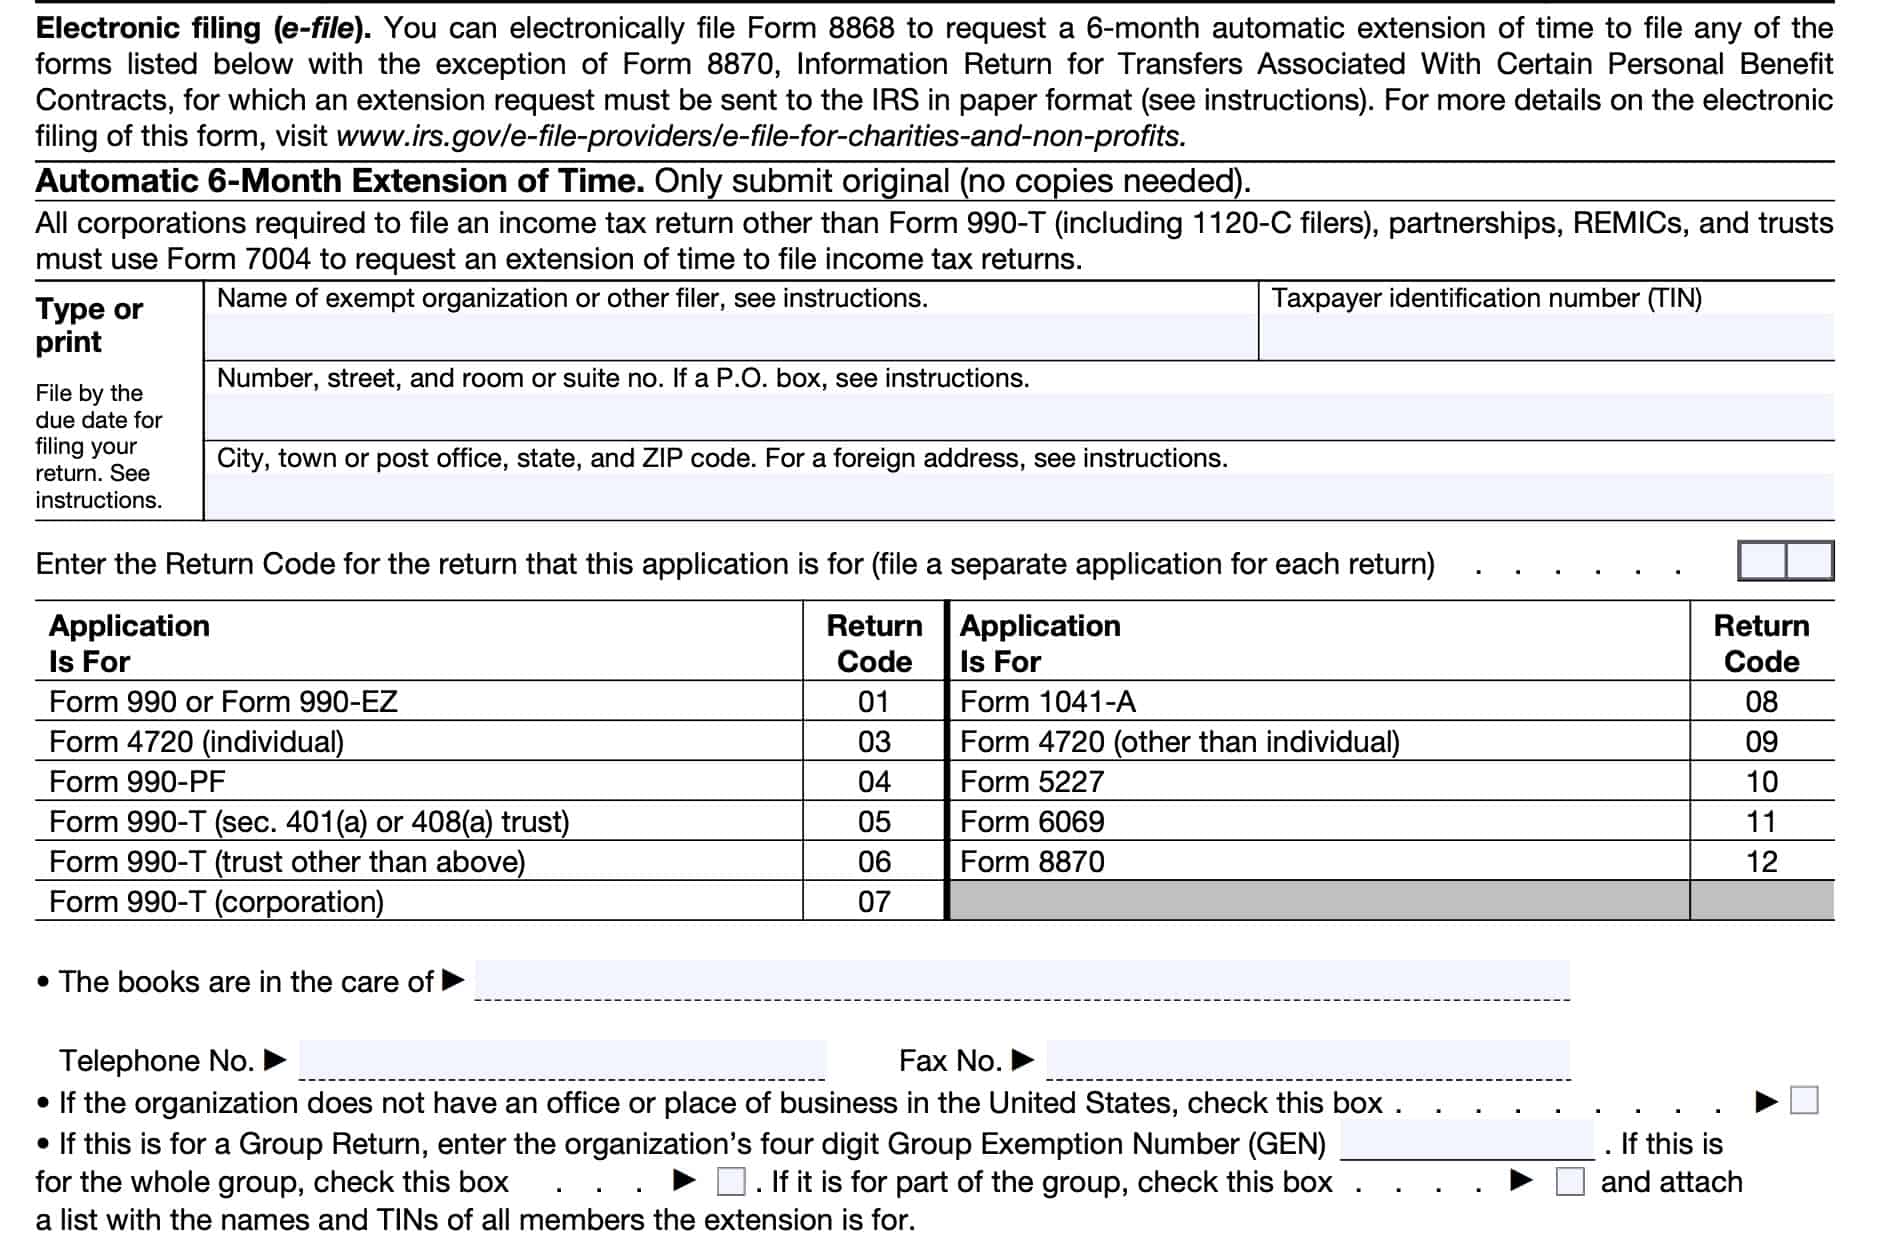 irs form 8868, top of form